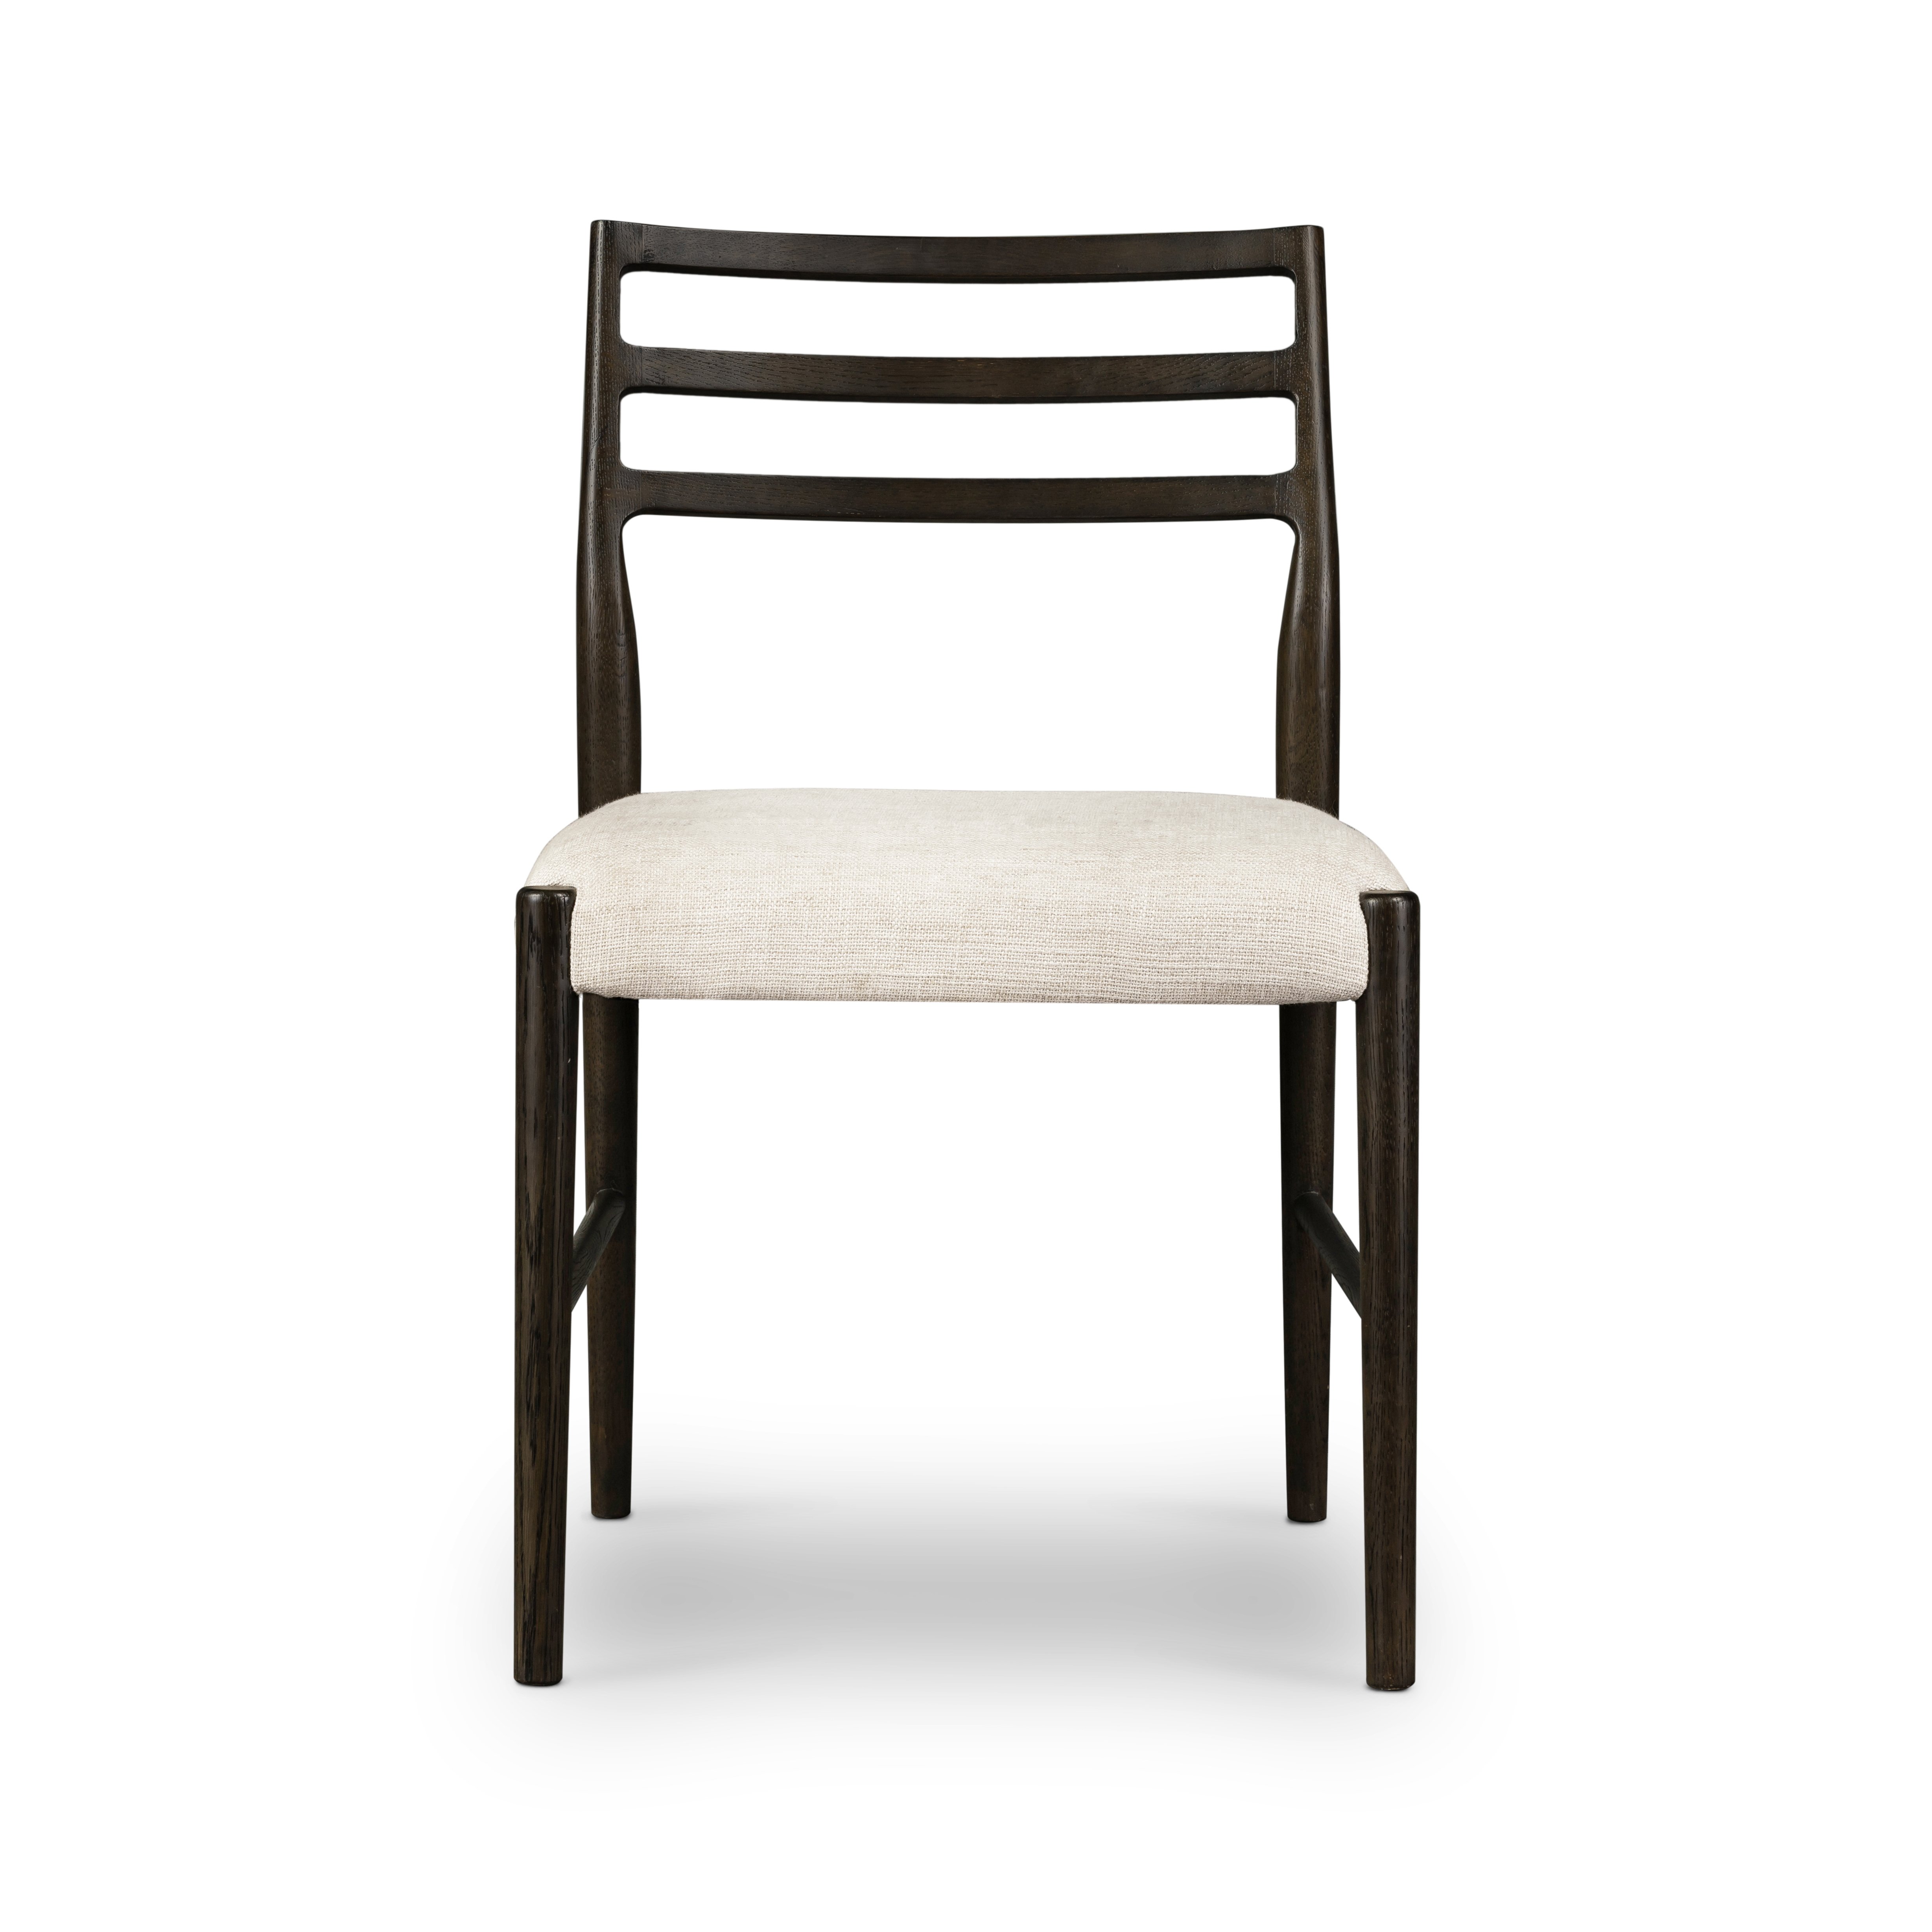 Glenmore Dining Chair-Essence Natural - Image 3